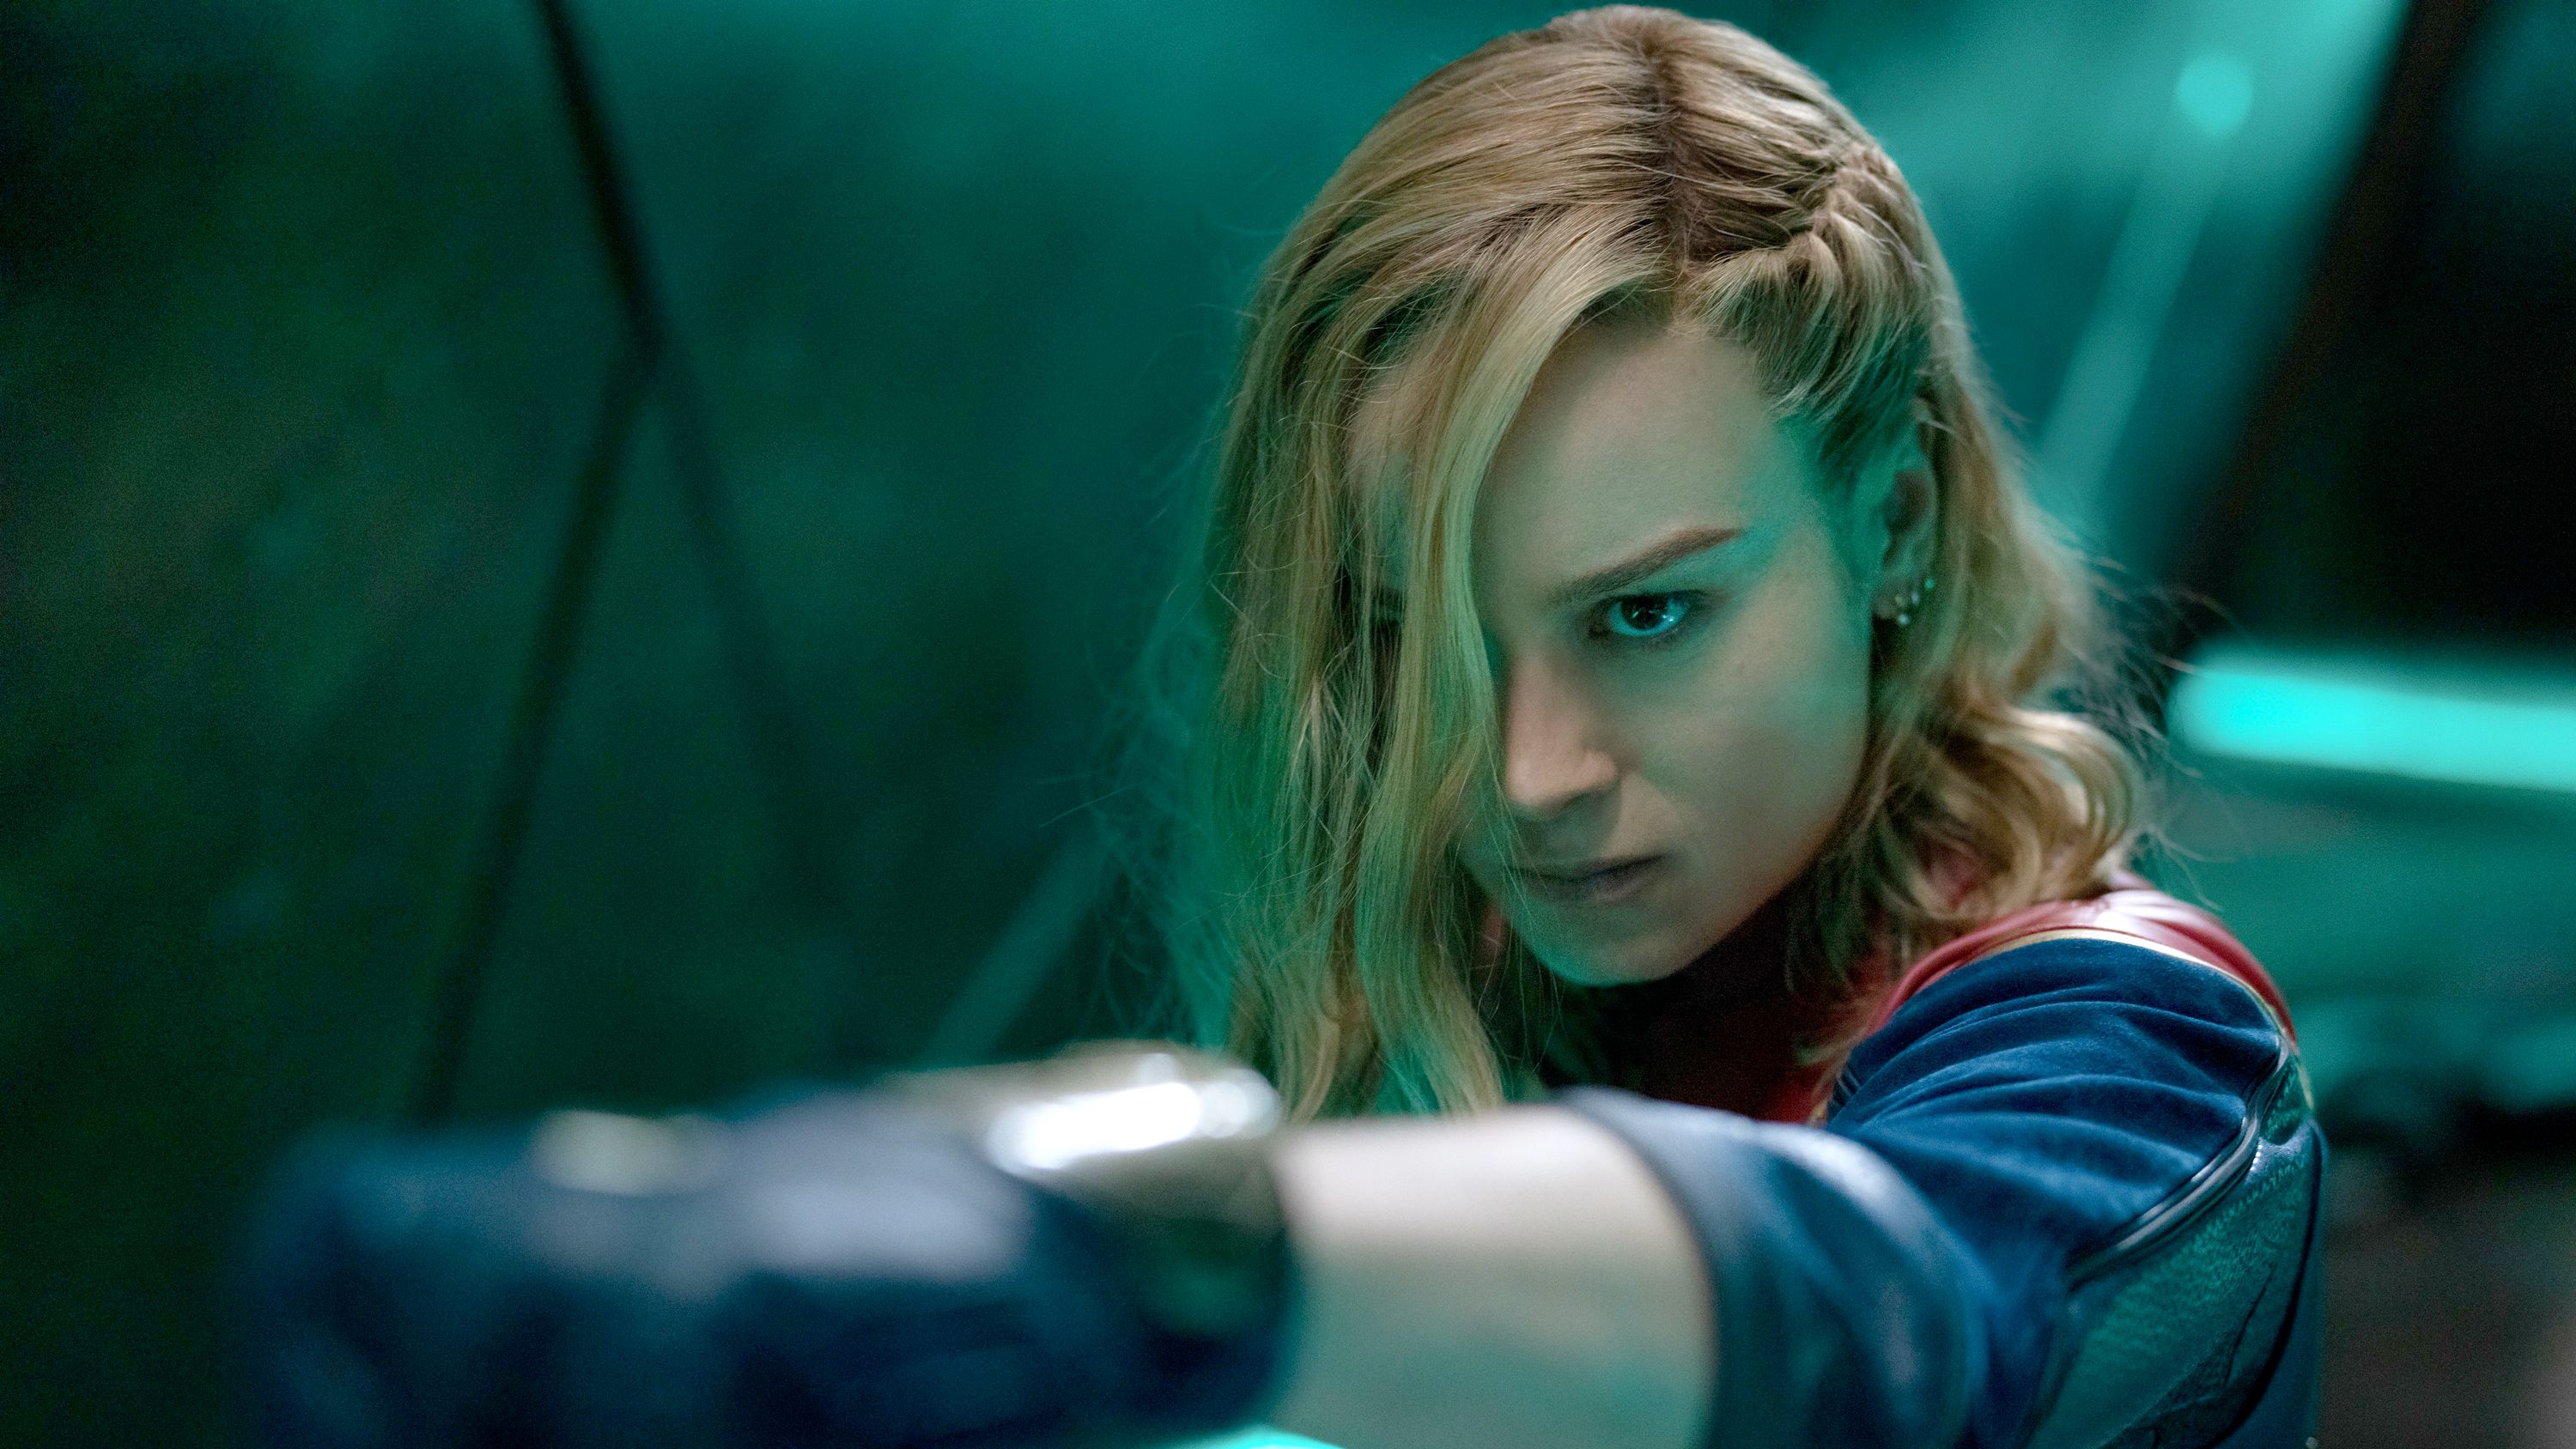 The Marvels: Everything to Know About the Captain Marvel Sequel